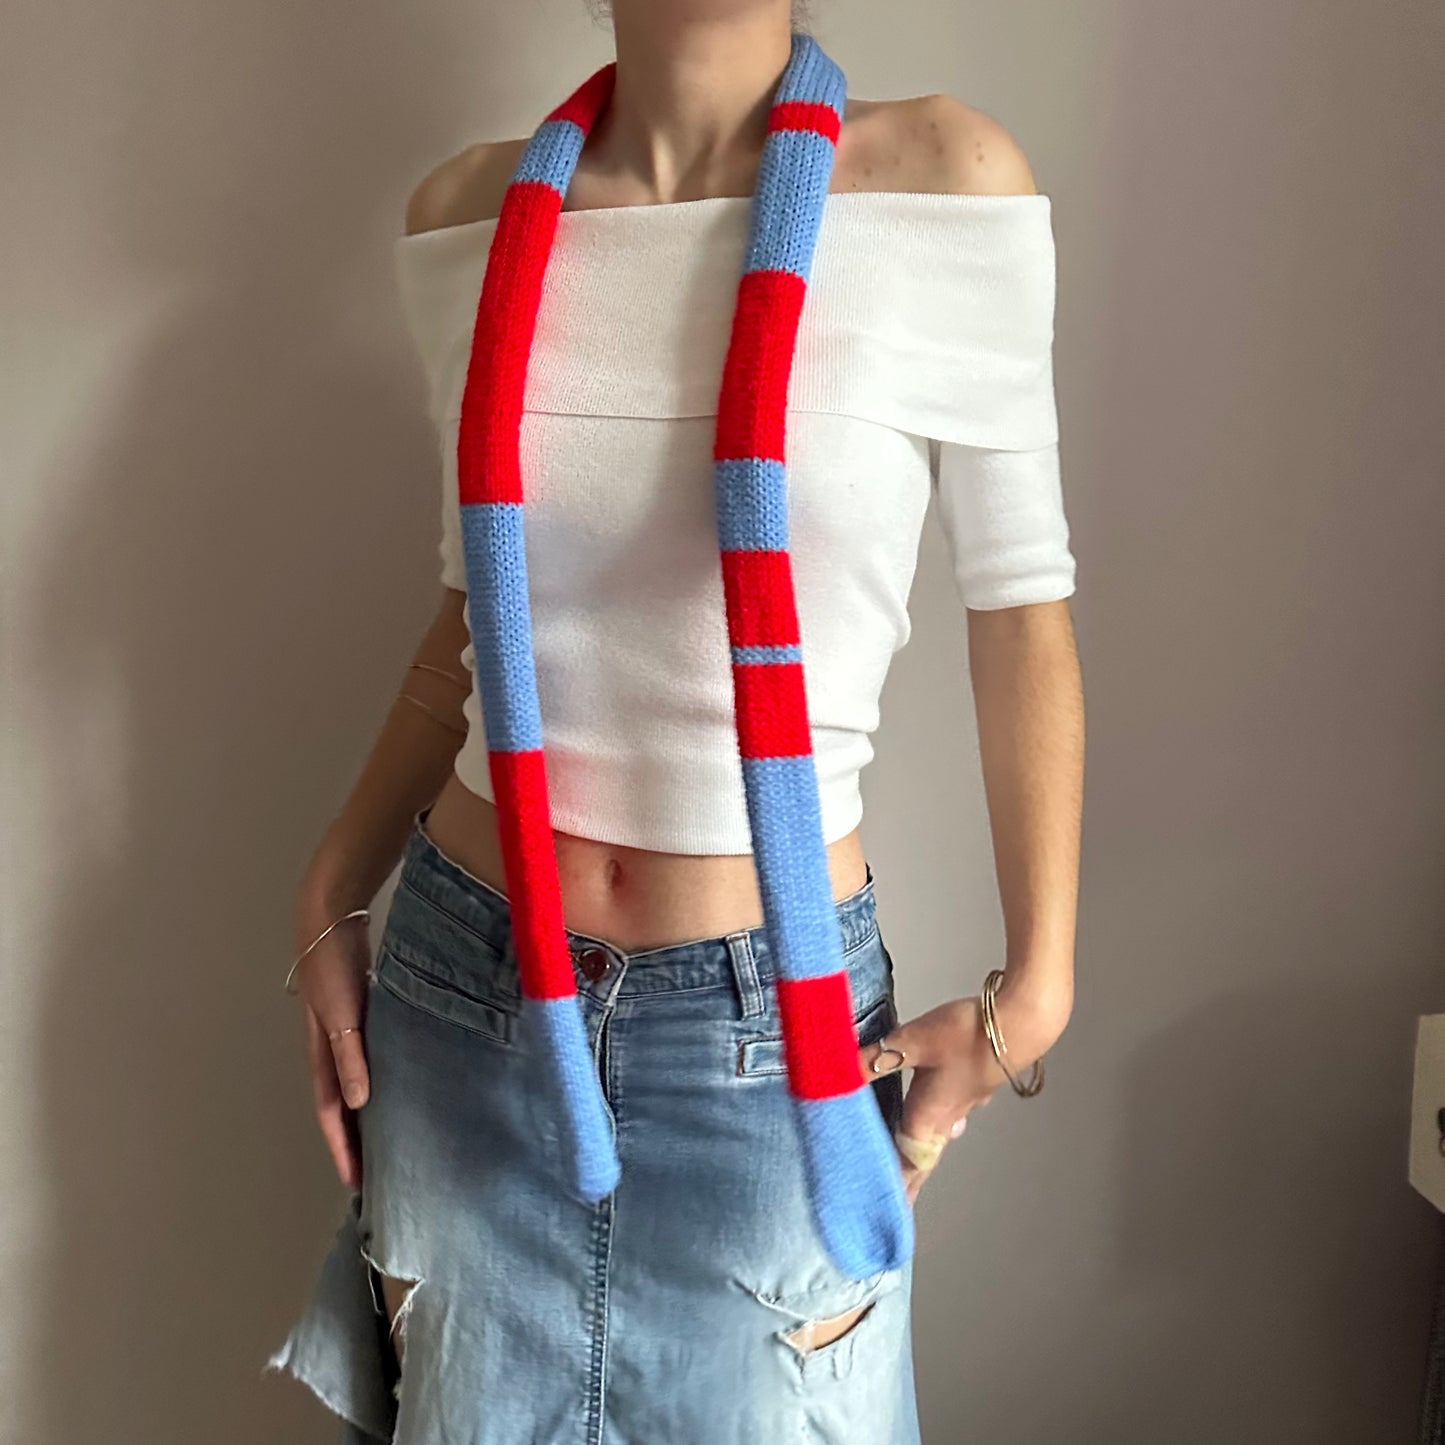 Handmade knitted stripy skinny scarf in red and blue